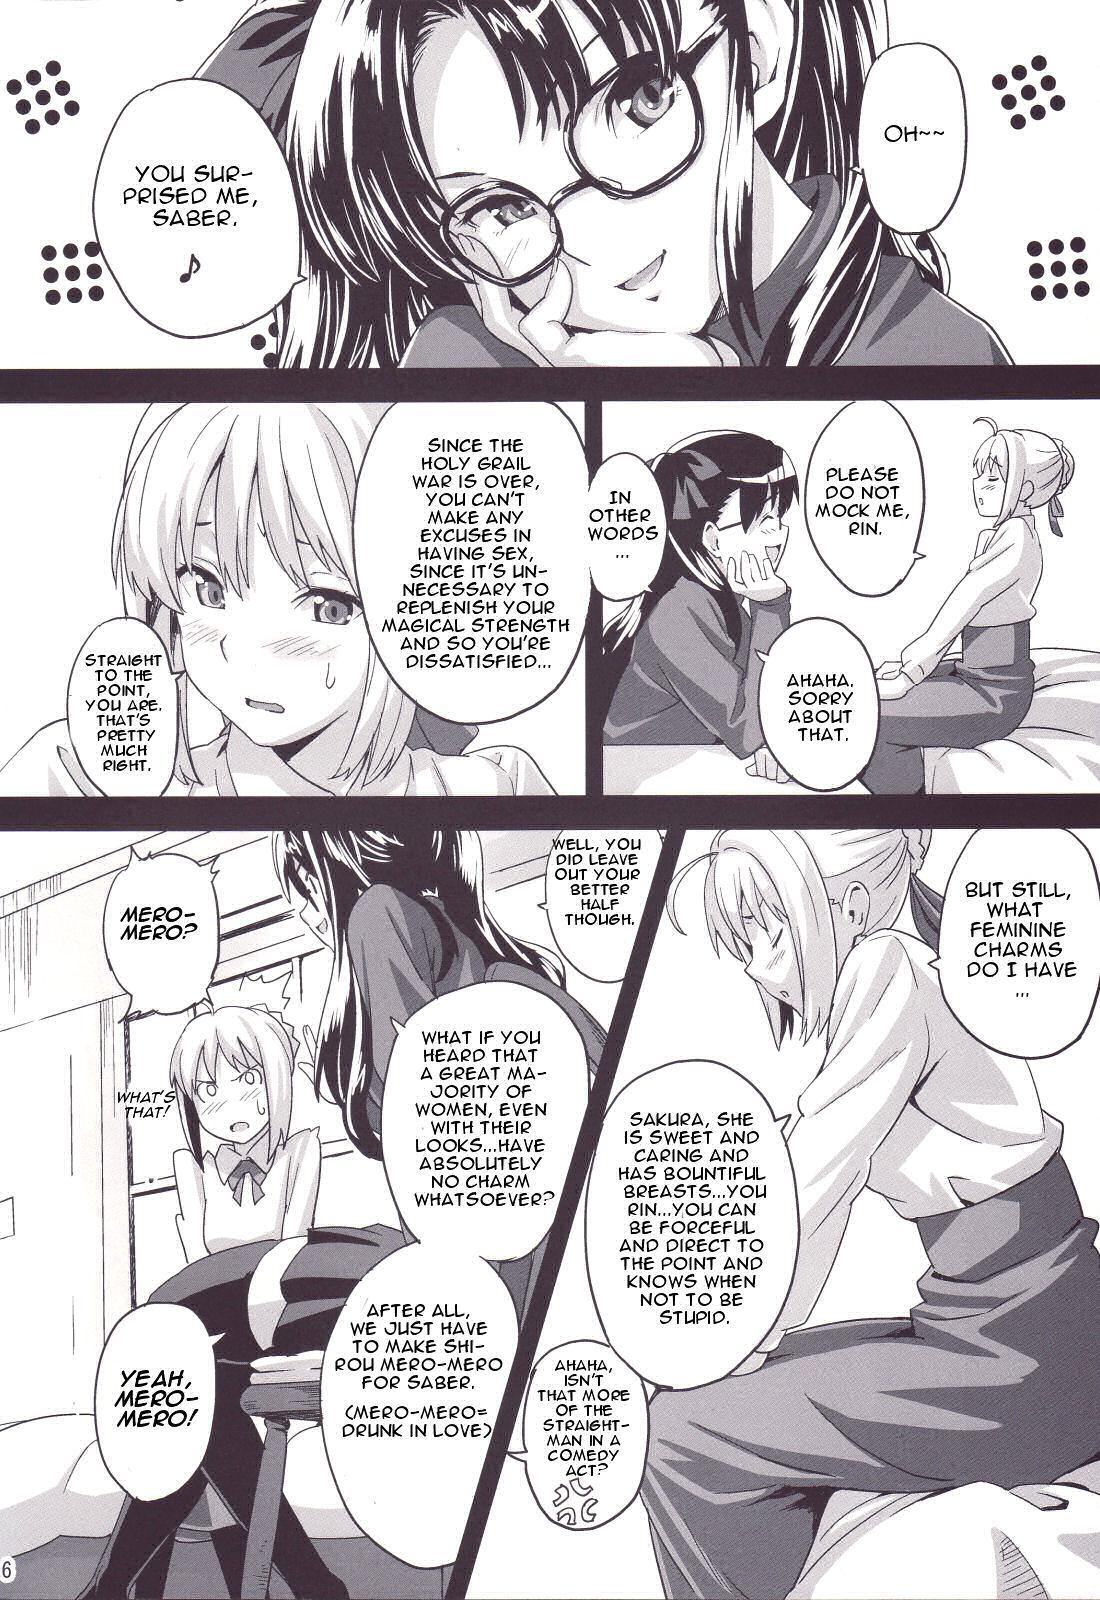 Gay Studs Outama King of Soul - Fate stay night Bathroom - Page 5